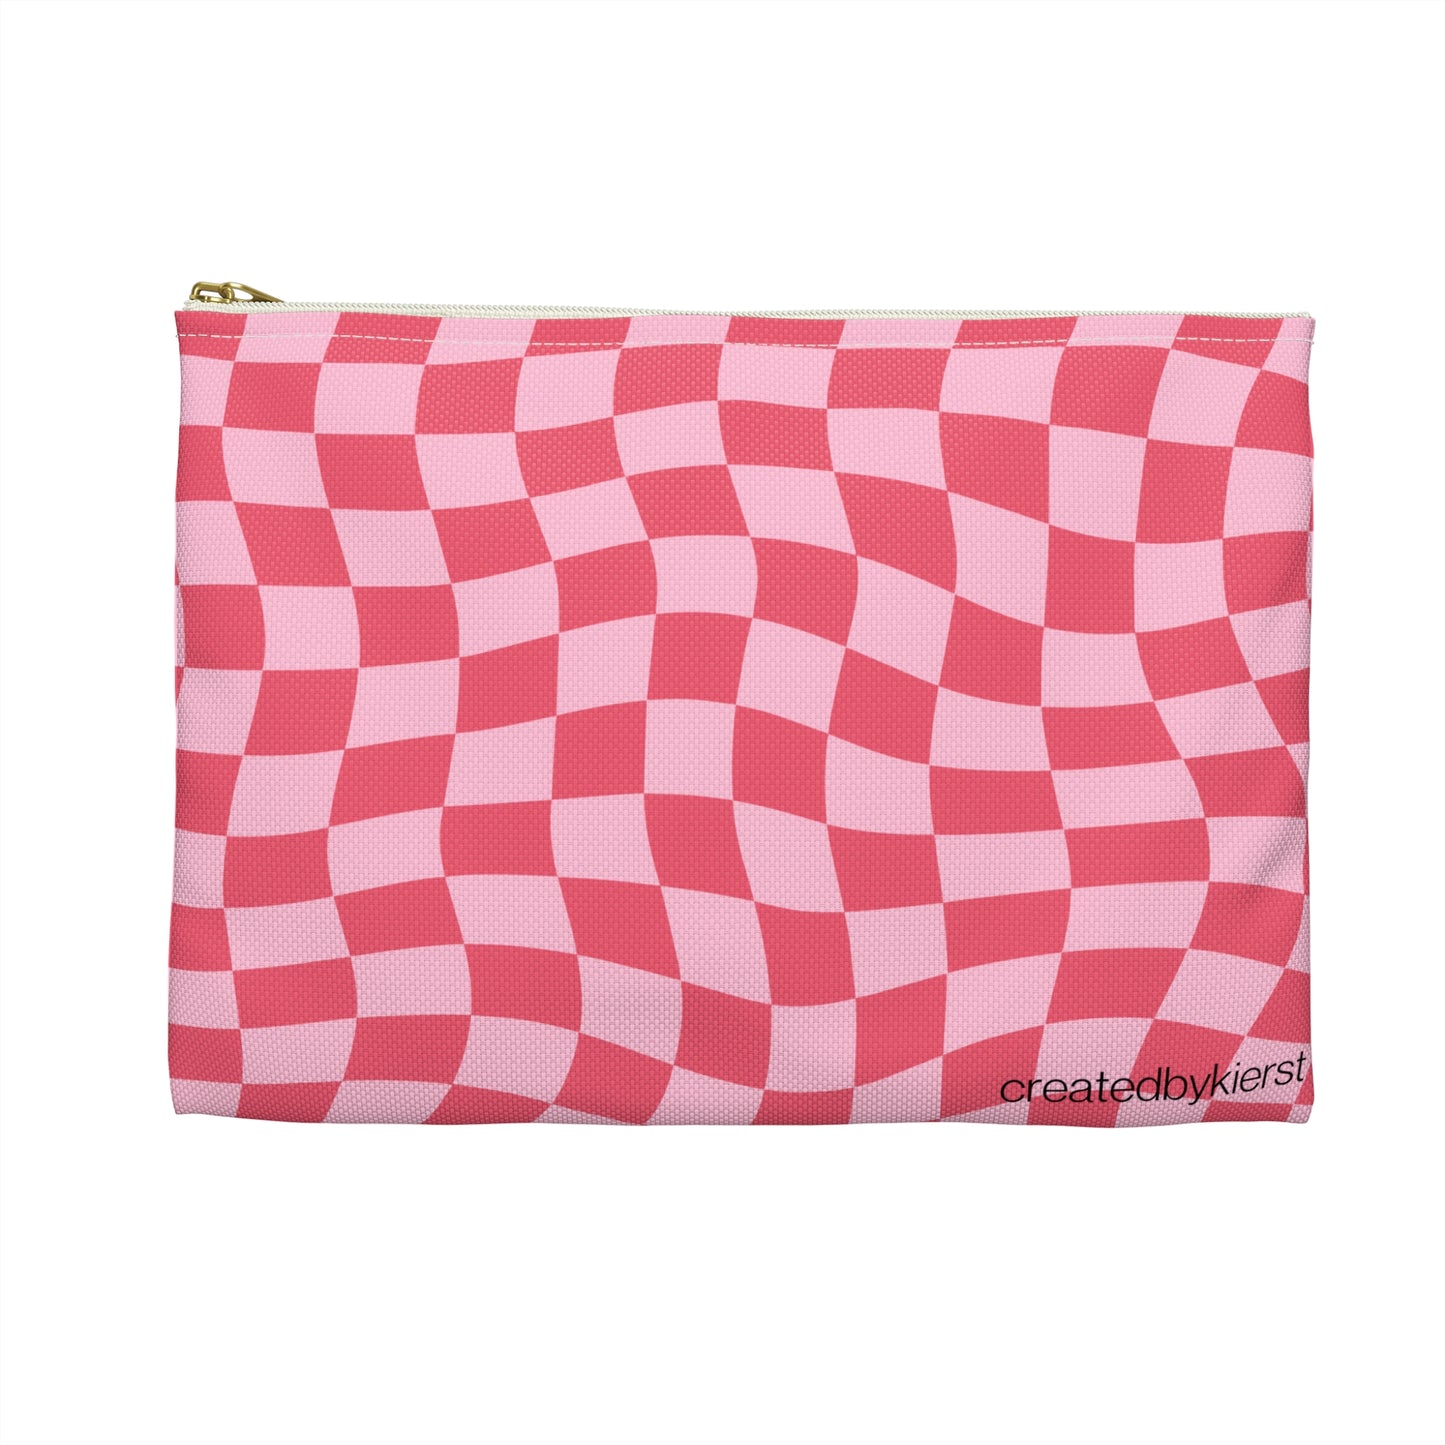 Animated Strawberry on Pink and Red Wavy Checkers Accessory Pouch